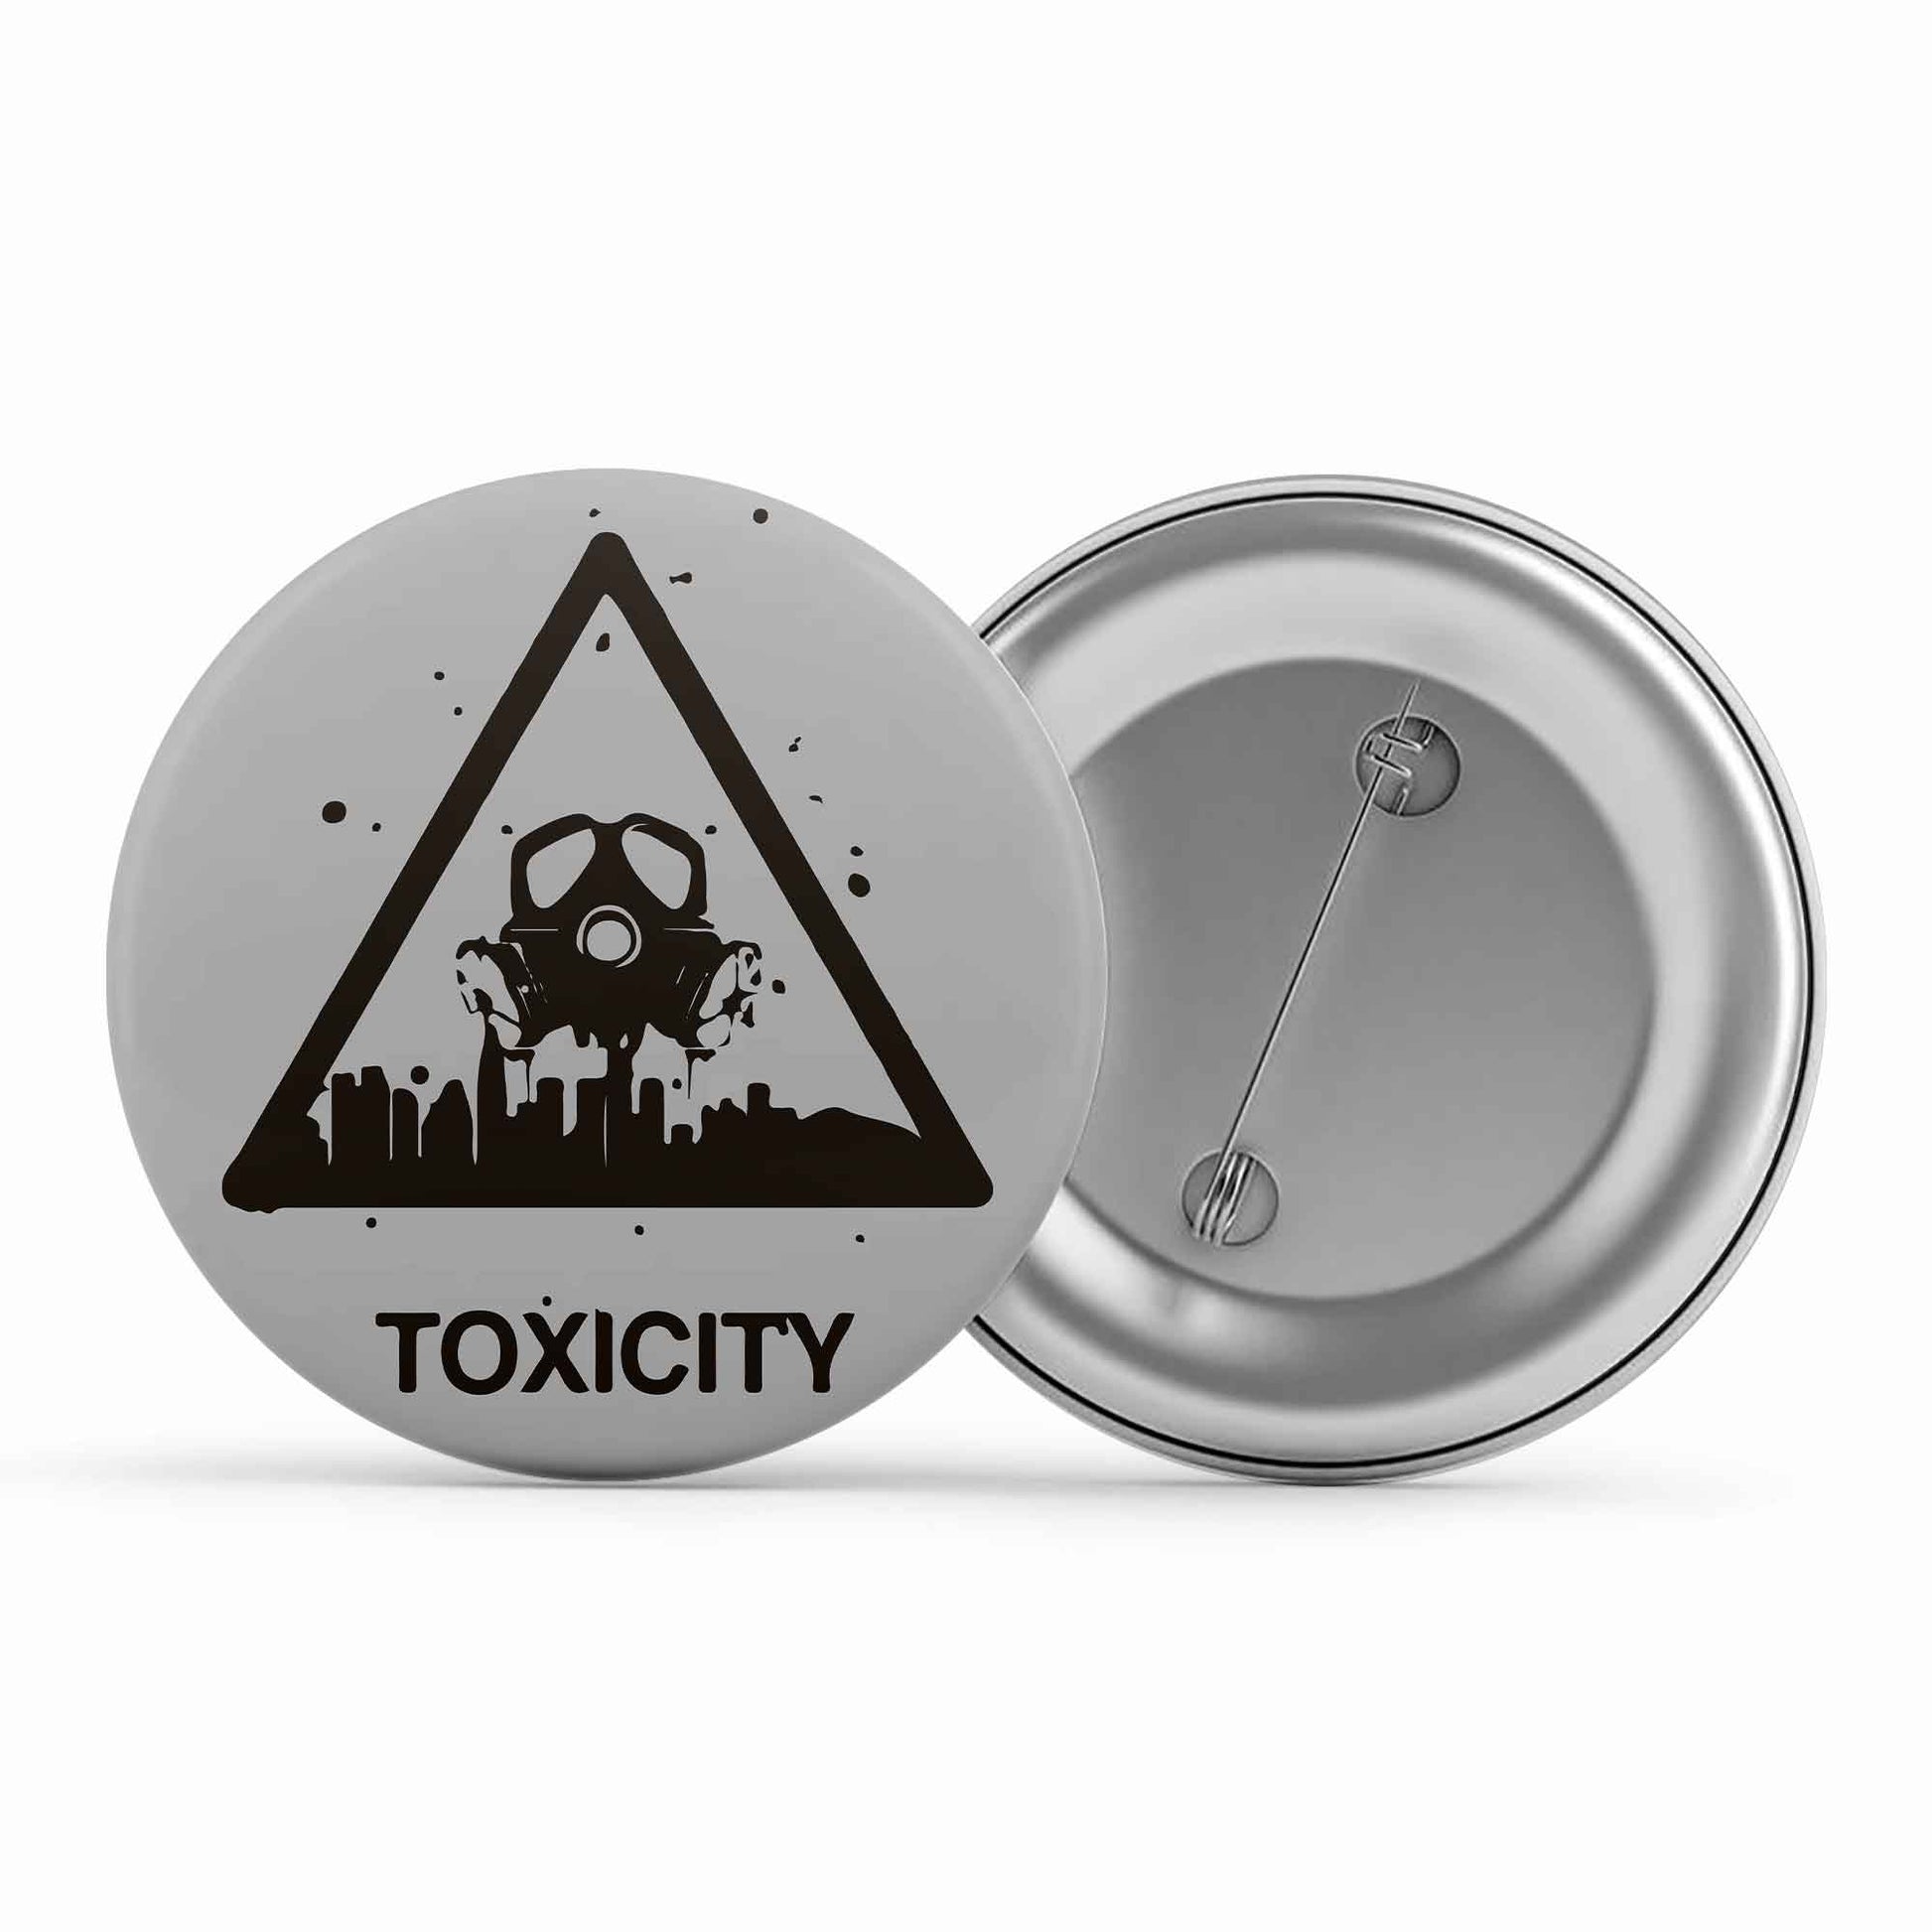 system of a down toxicity badge pin button music band buy online united states of america usa the banyan tee tbt men women girls boys unisex